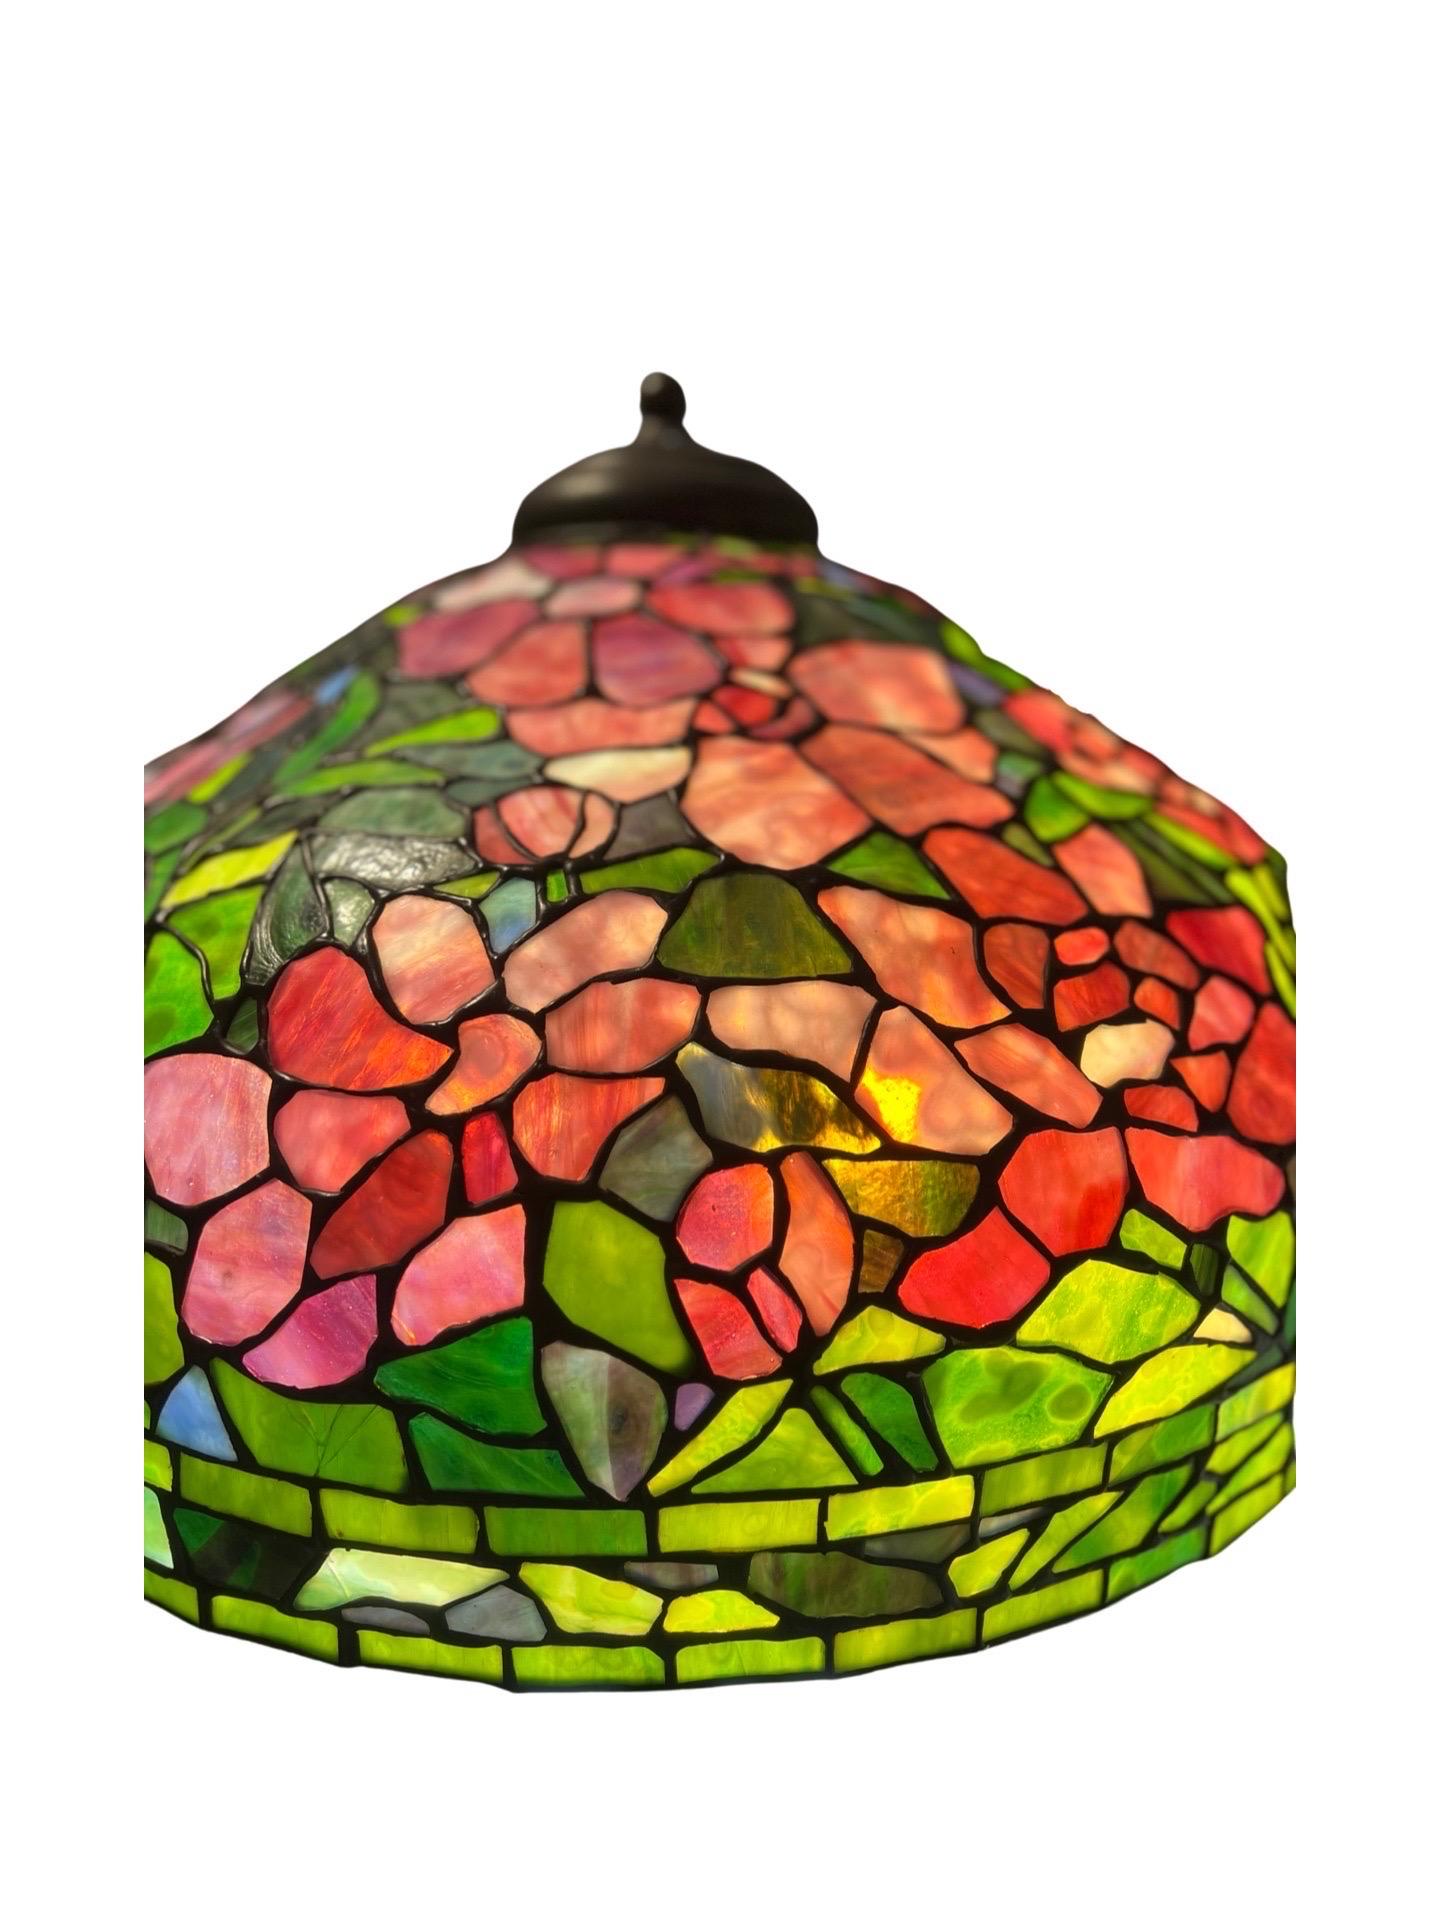 American Unique Art Glass & Metal Company Leaded Glass Peony Table Lamp C. 1915 For Sale